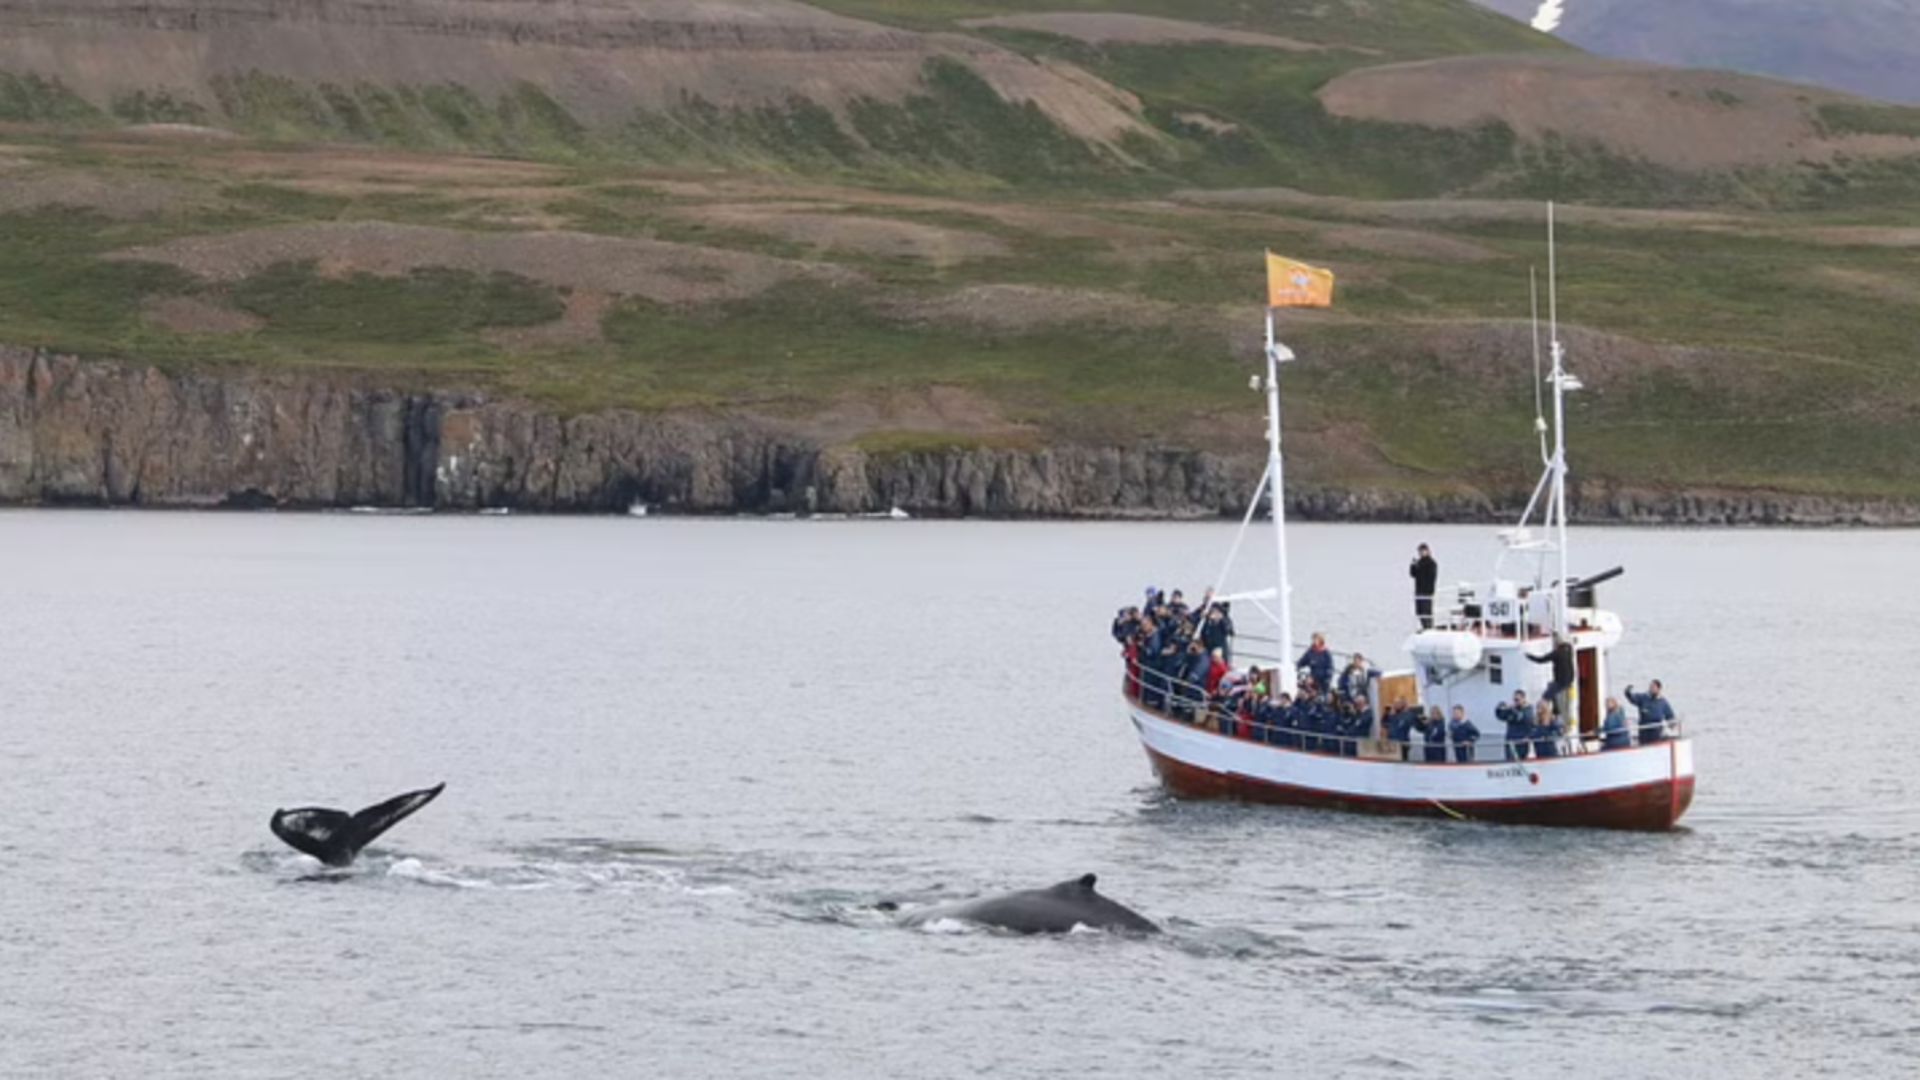 Boat on the whale watching tour in Iceland